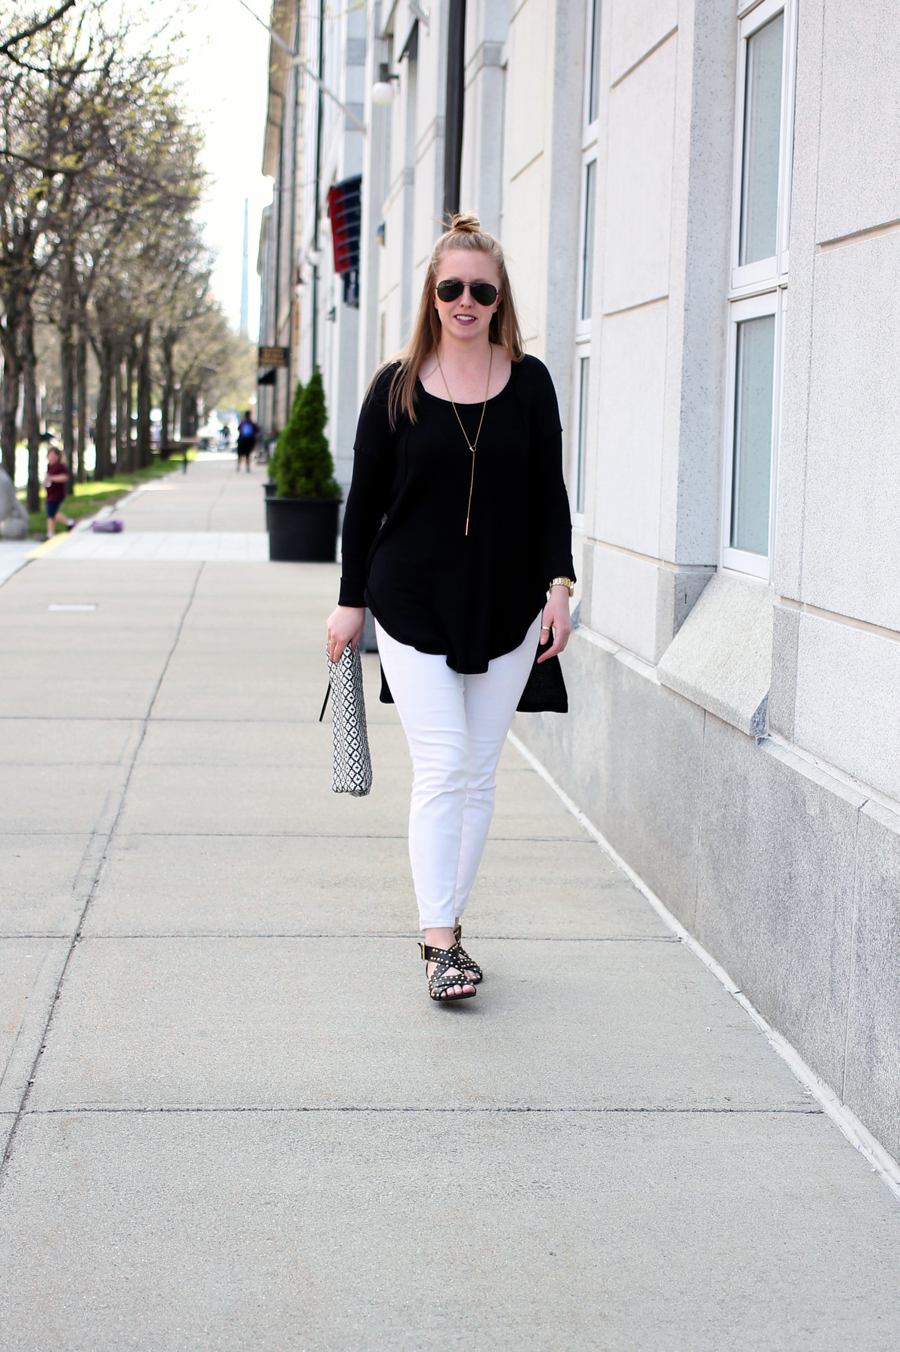 boston blogger outfits, boston blogger spring, black and white street style, street style boston, vince camuto woven clutch, woven black and white clutch, free people thermal top, free people at lord and taylor, shop my post